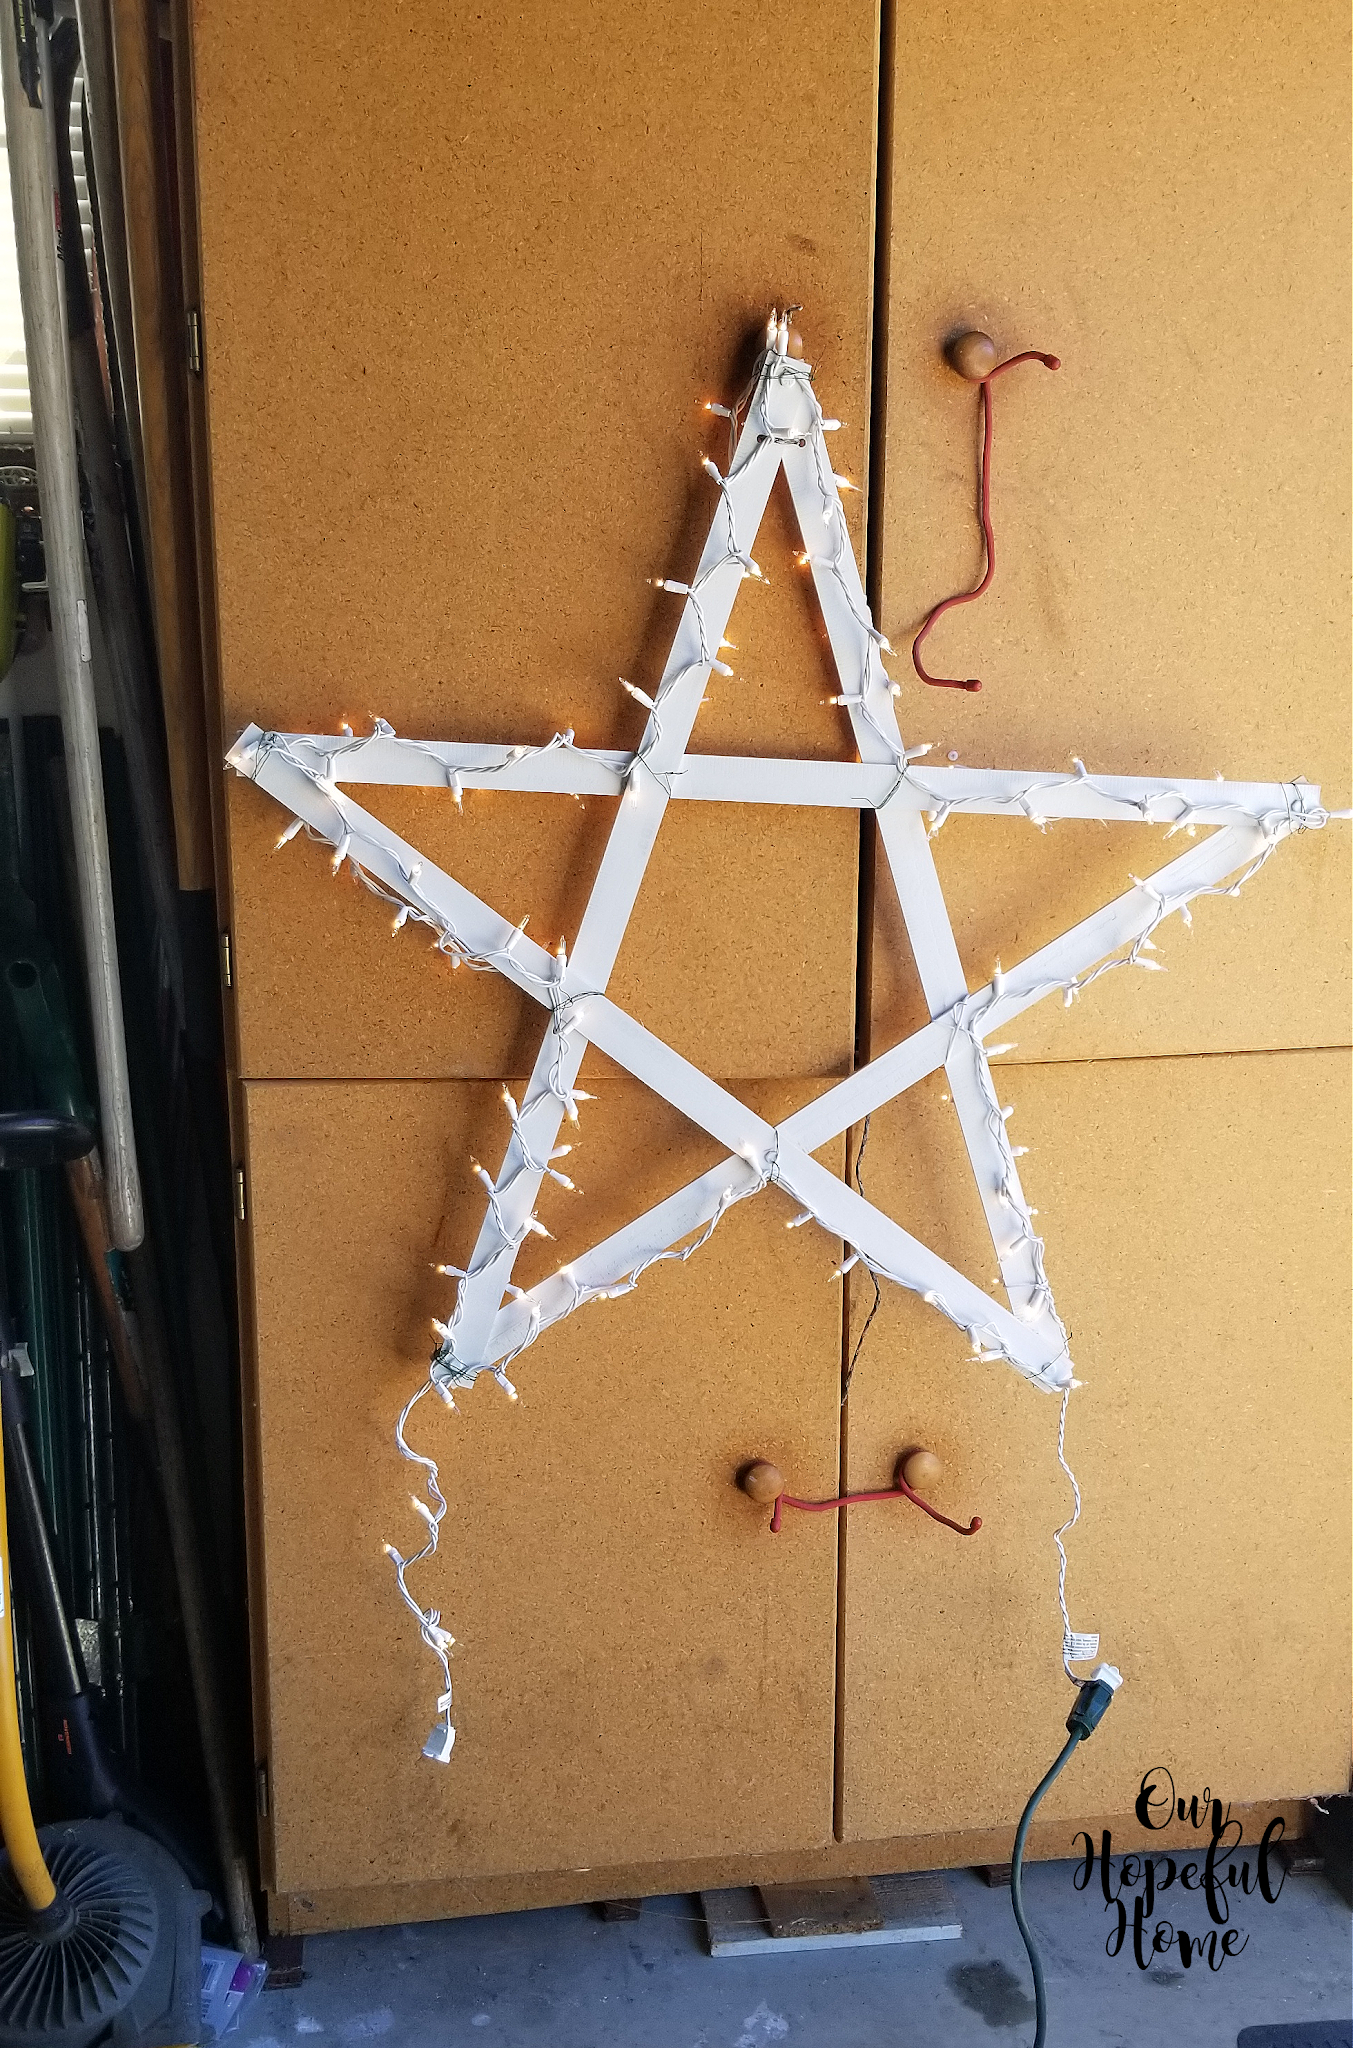 5 Ways to Make Wooden Star Decorations from Cheap Yard Sticks